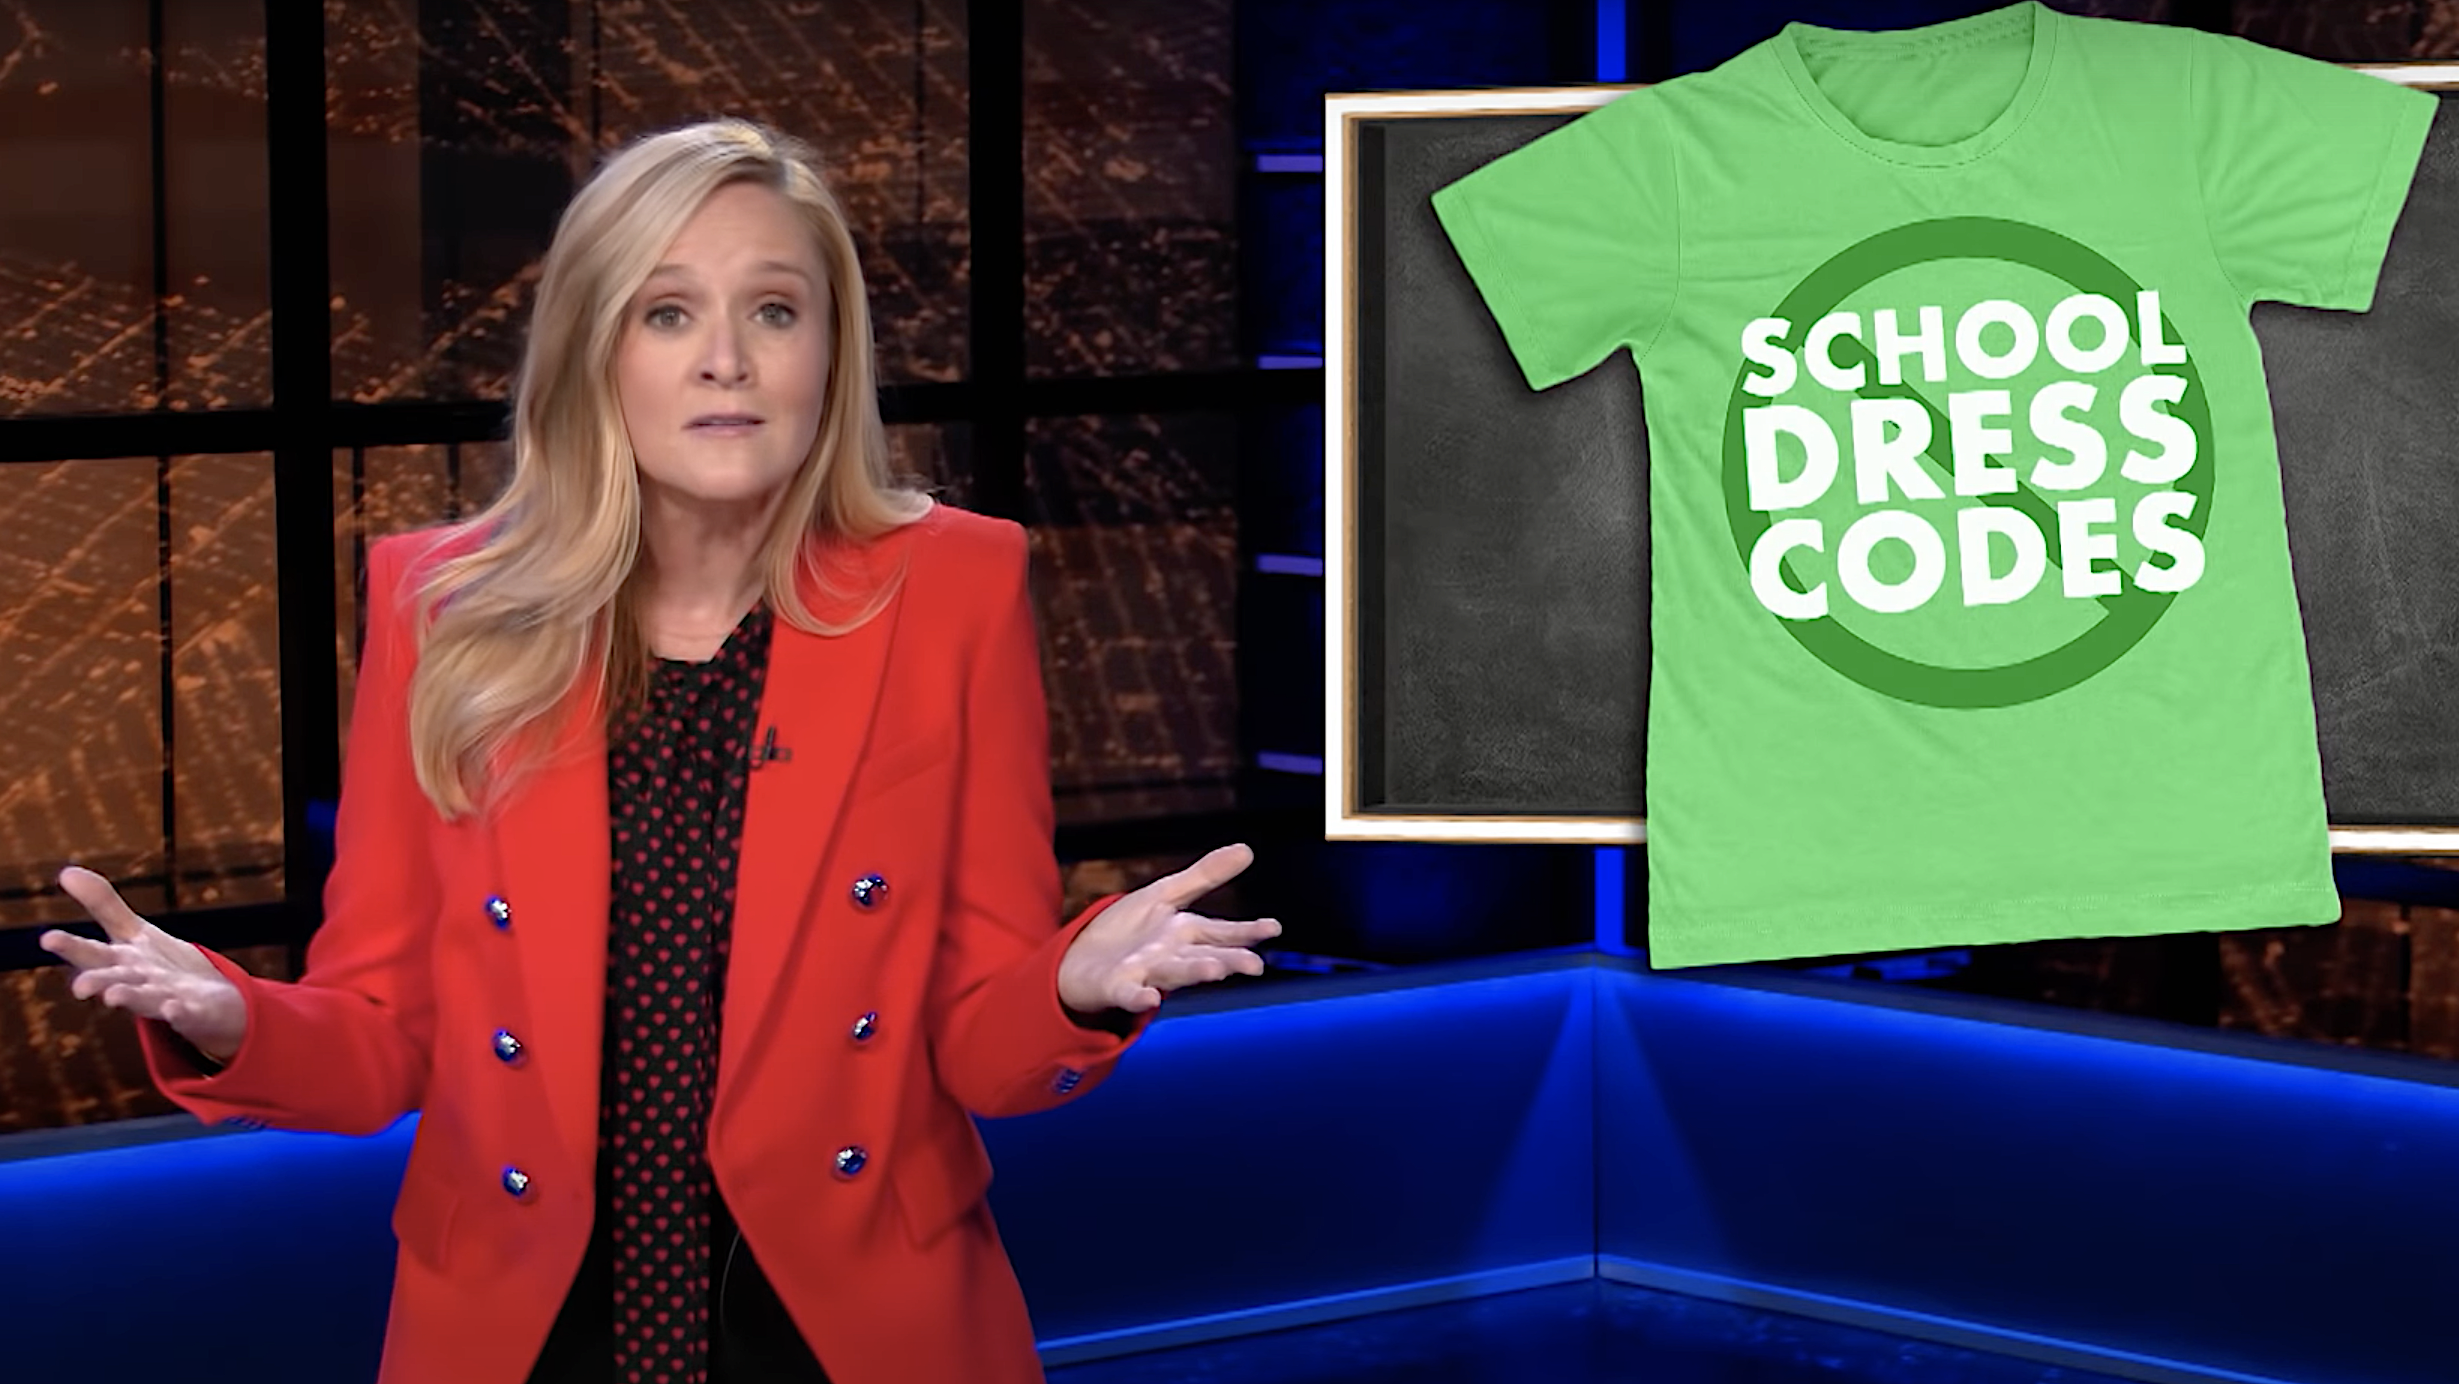 Full Frontal returns, with Sam Bee plucking sexist, racist school dress codes out of the hiatus chaos